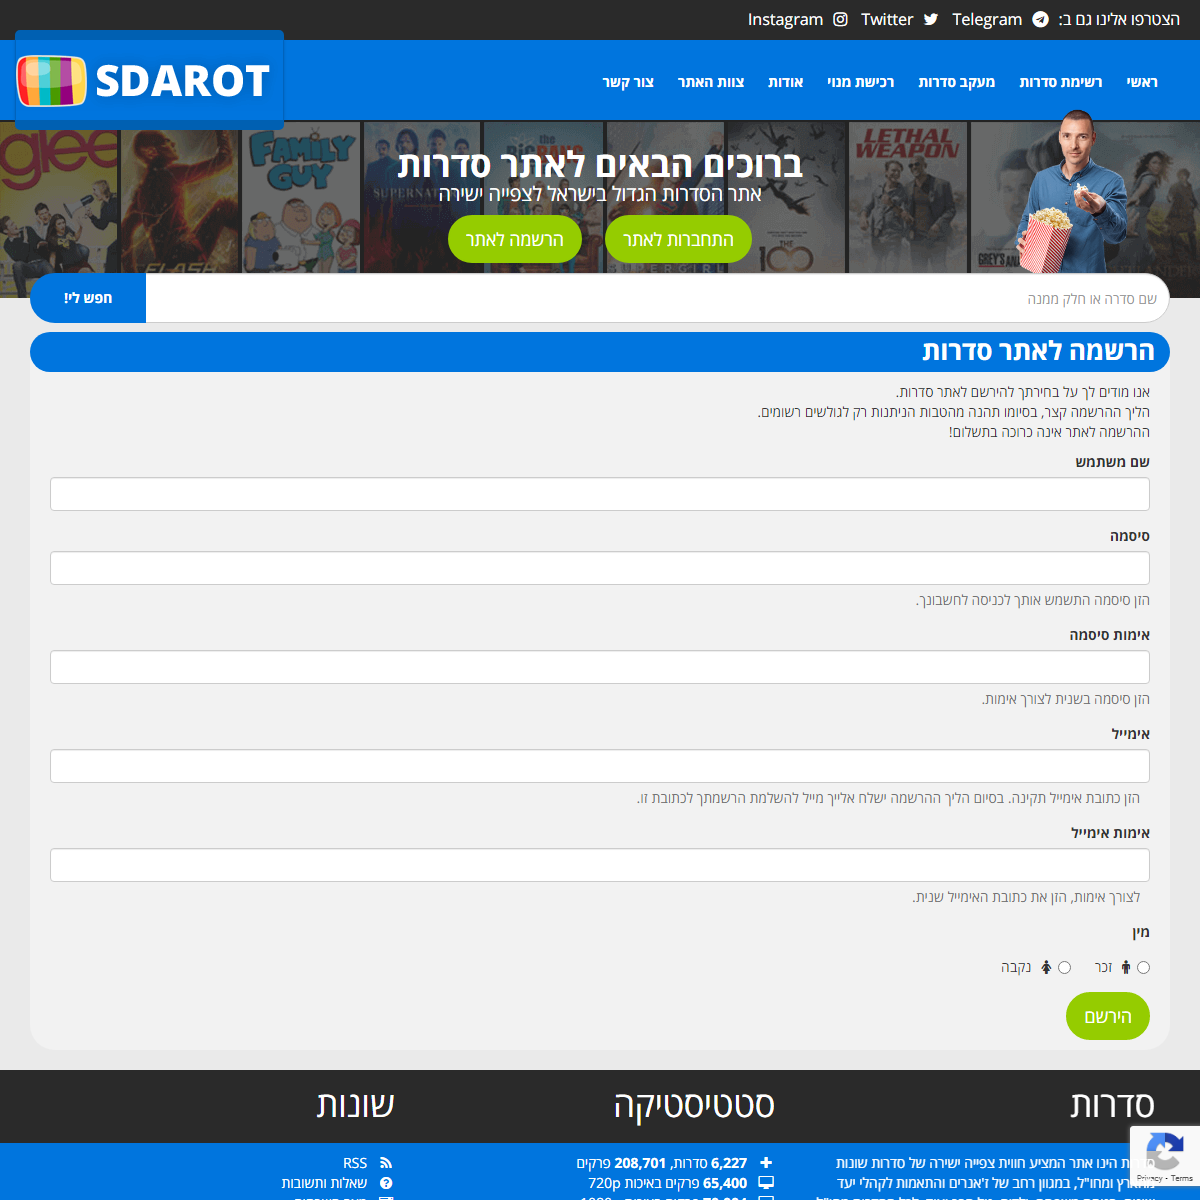 A complete backup of https://sdarot.world/signup